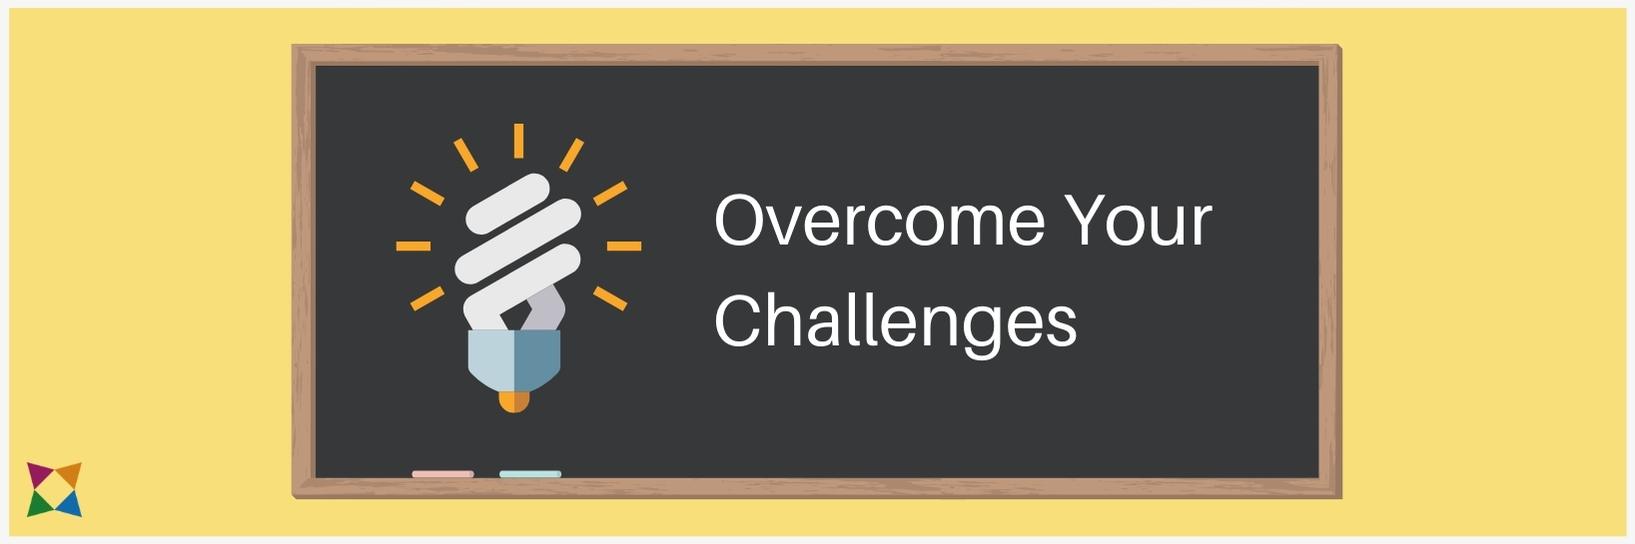 overcome-your-challenges-cte